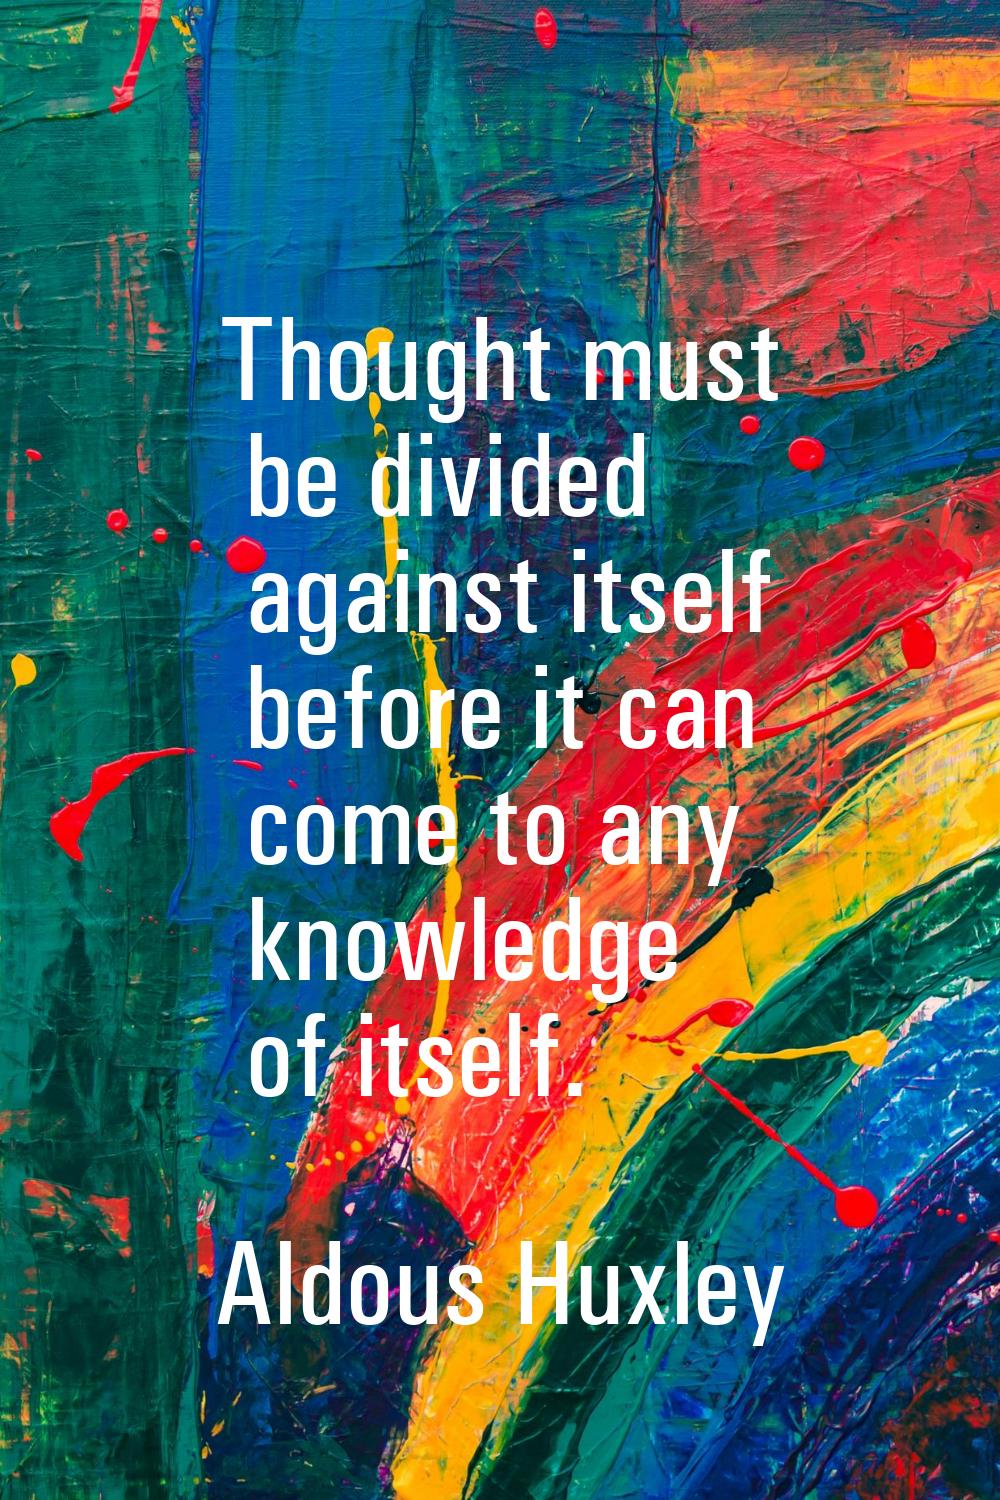 Thought must be divided against itself before it can come to any knowledge of itself.